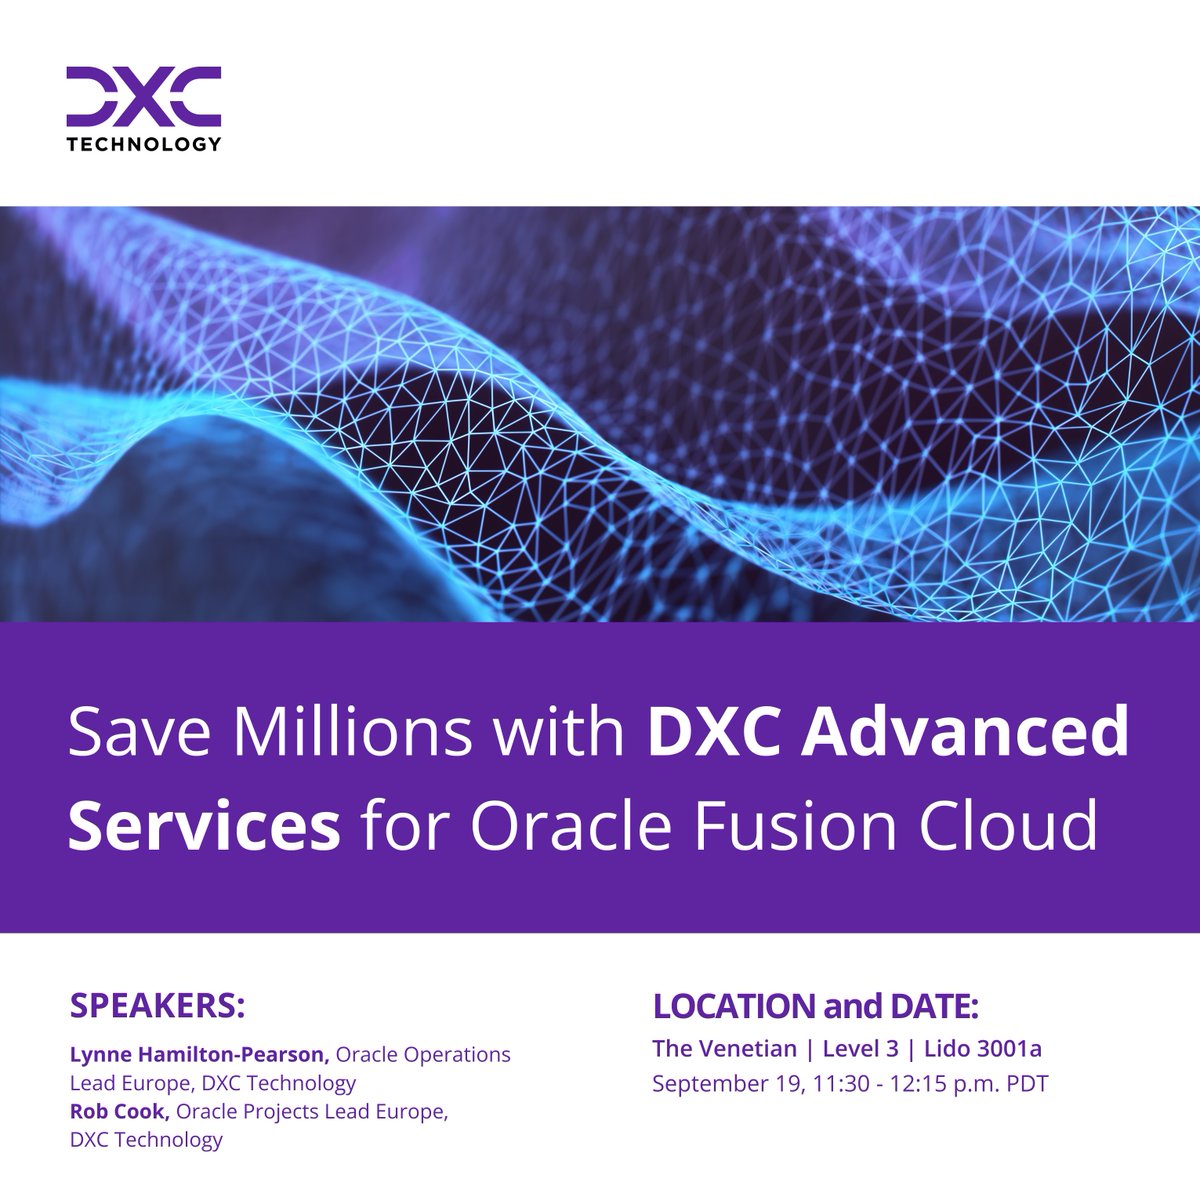 Join our DXC sessions at Oracle #CloudWorld 2023 in Las Vegas: Advanced Services for Oracle Fusion Cloud, explore multicloud migration with confidence, and discover next-generation application management with DXC Learning Byte.

dxc.to/3LqBpSx

#DXCPartners #Cloud